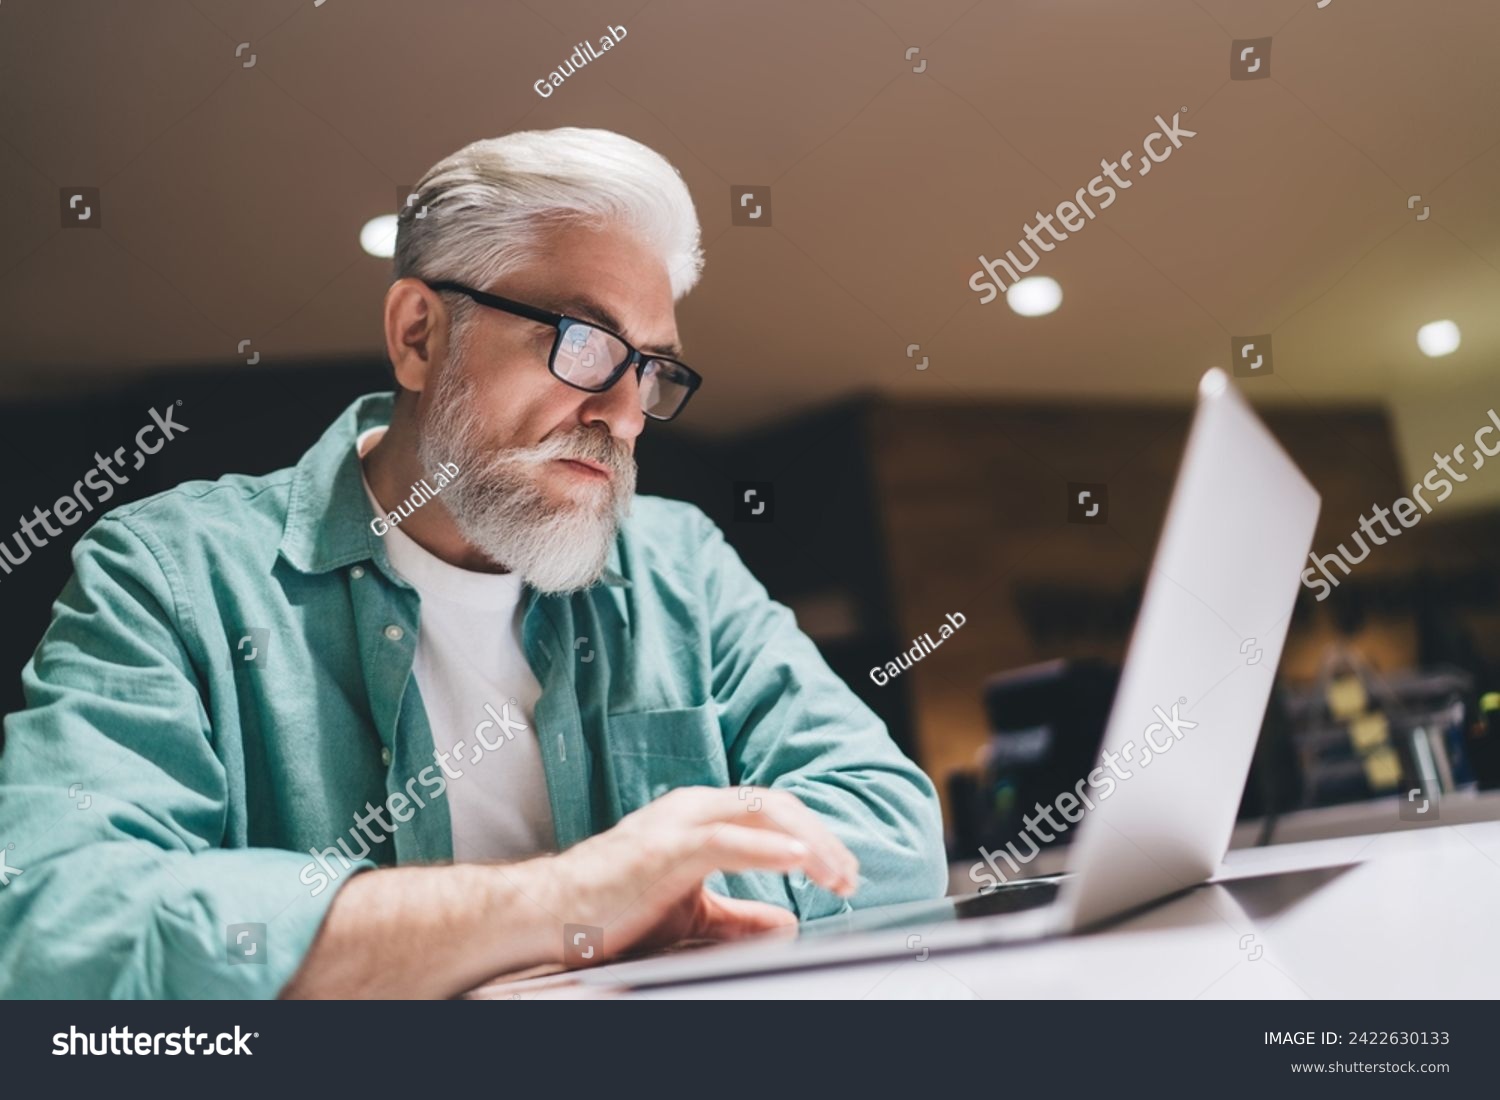 Focused senior Caucasian man with a beard working intently on a laptop in an indoor setting, wearing glasses and a green shirt, symbolizing professional dedication and digital engagement in later life #2422630133